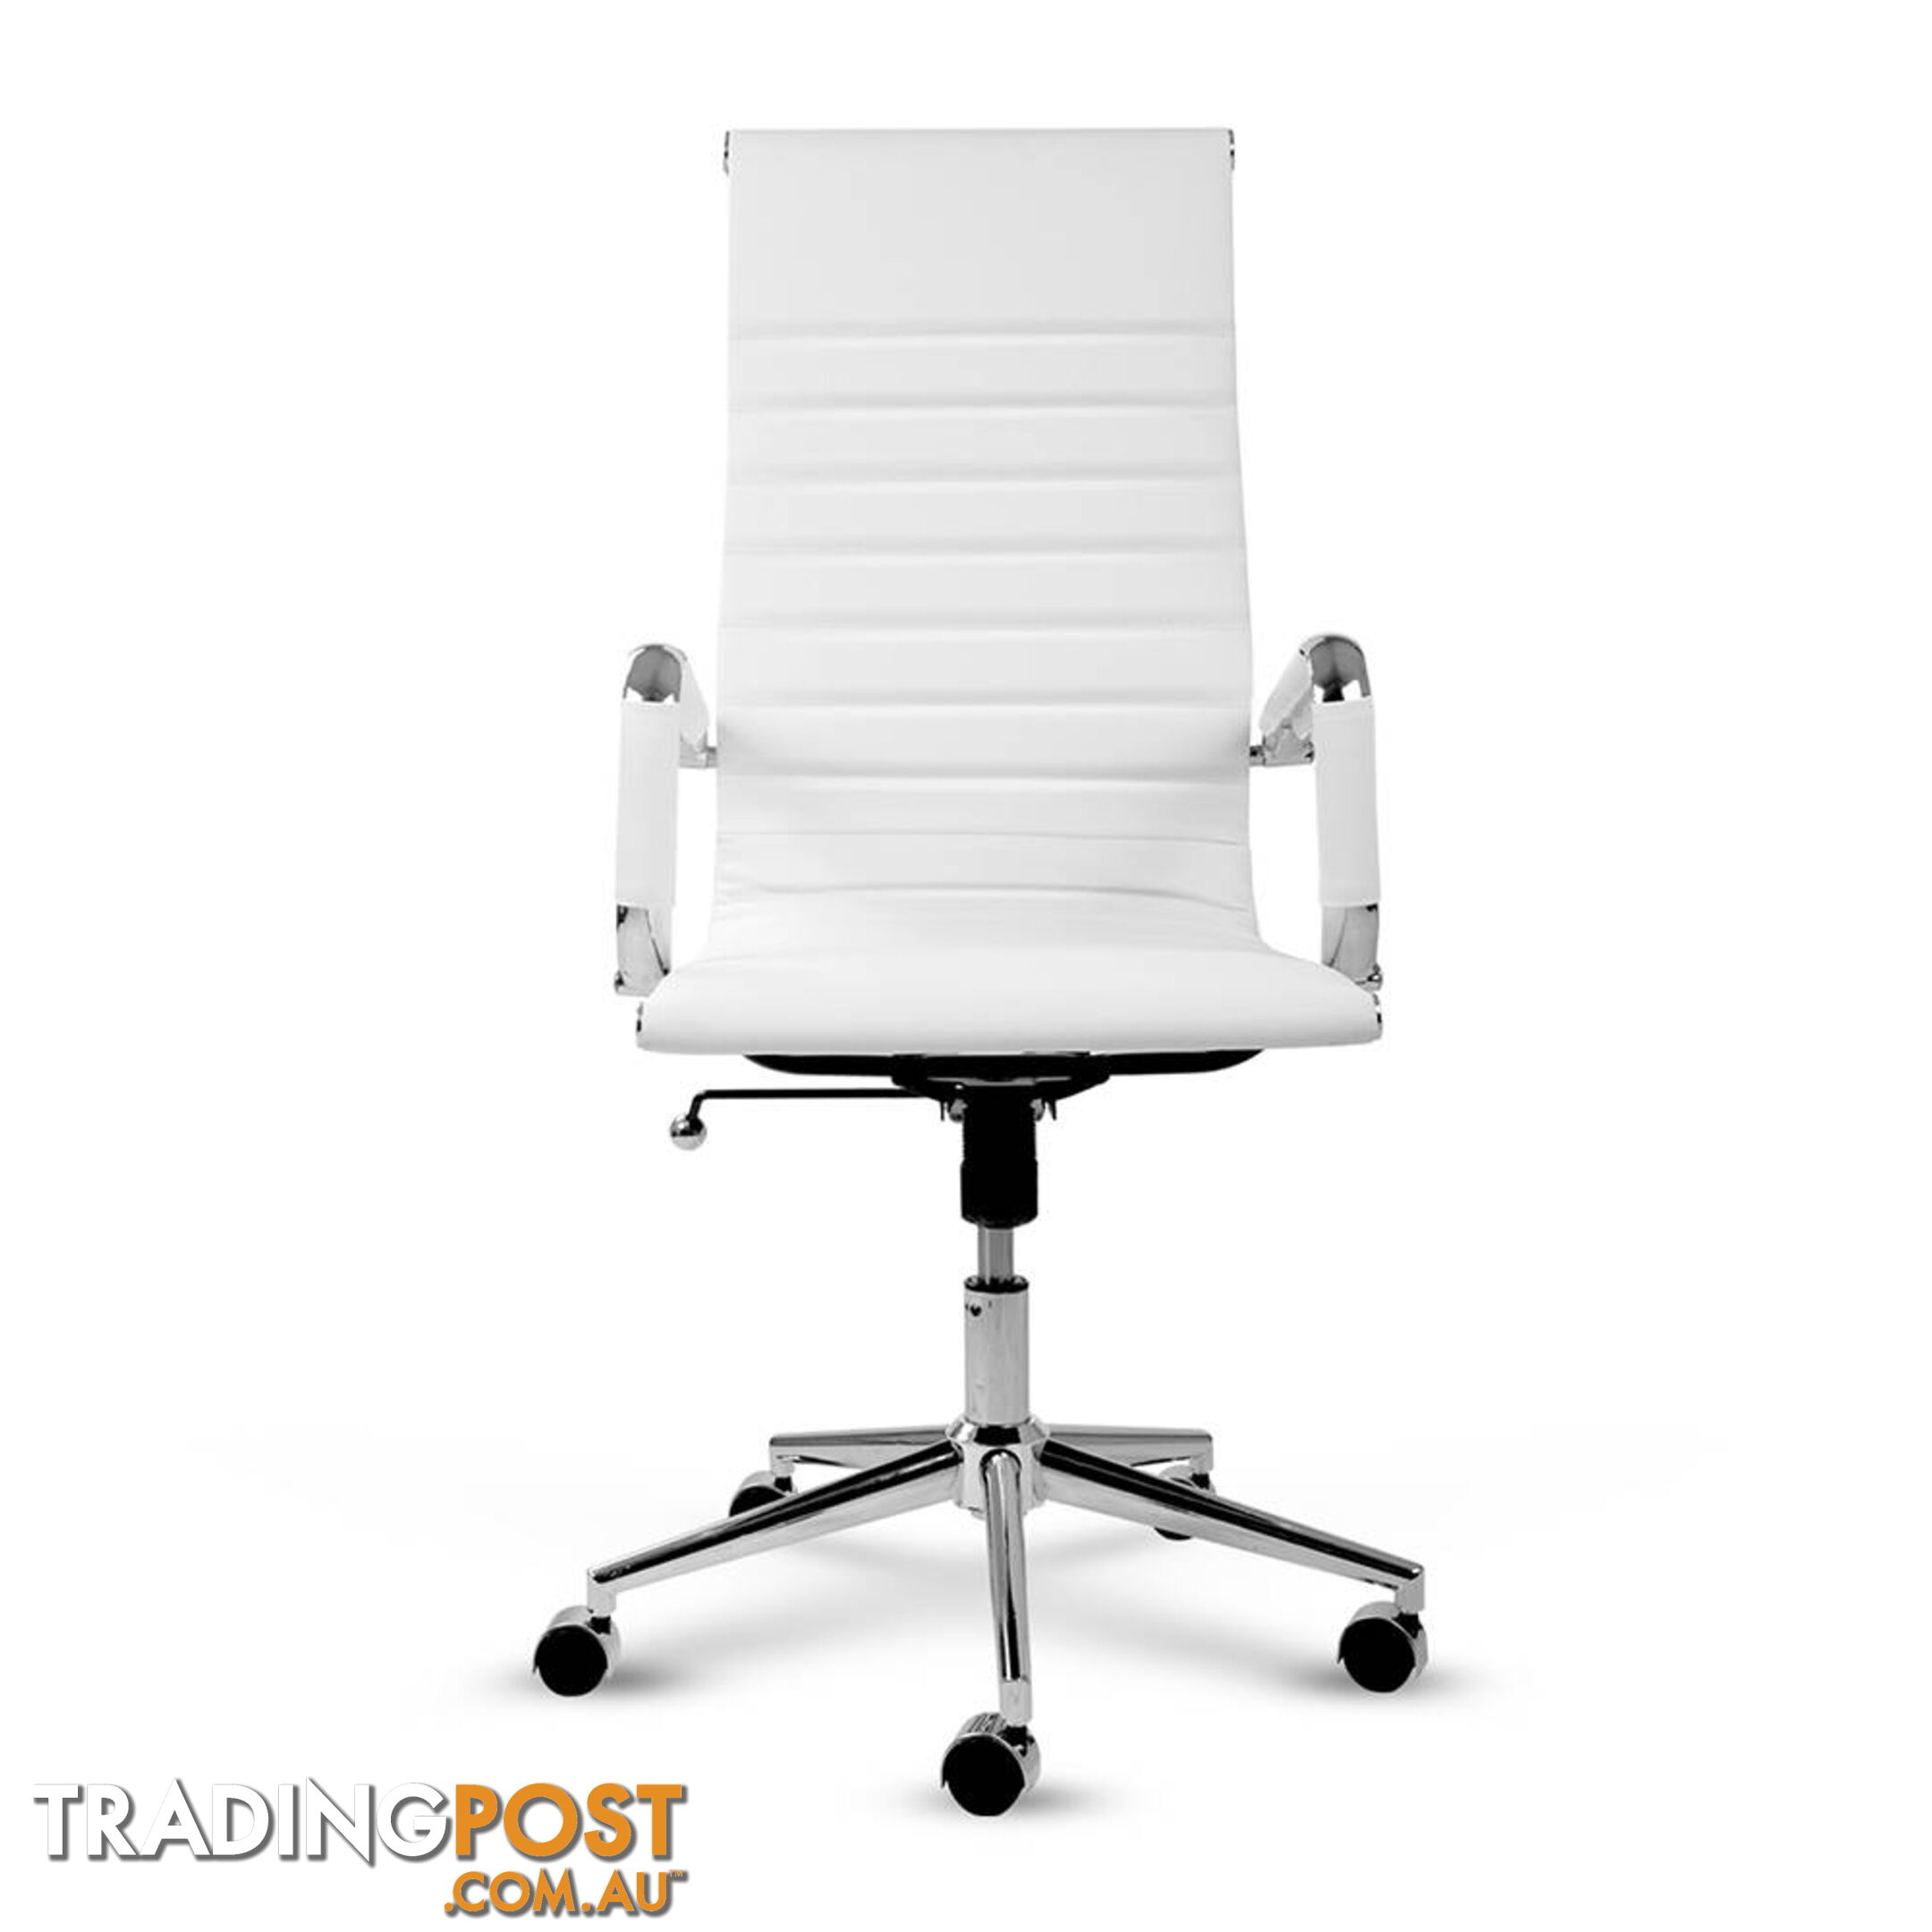 PU Leather High Back Executive Computer Office Chair Eames Replica White